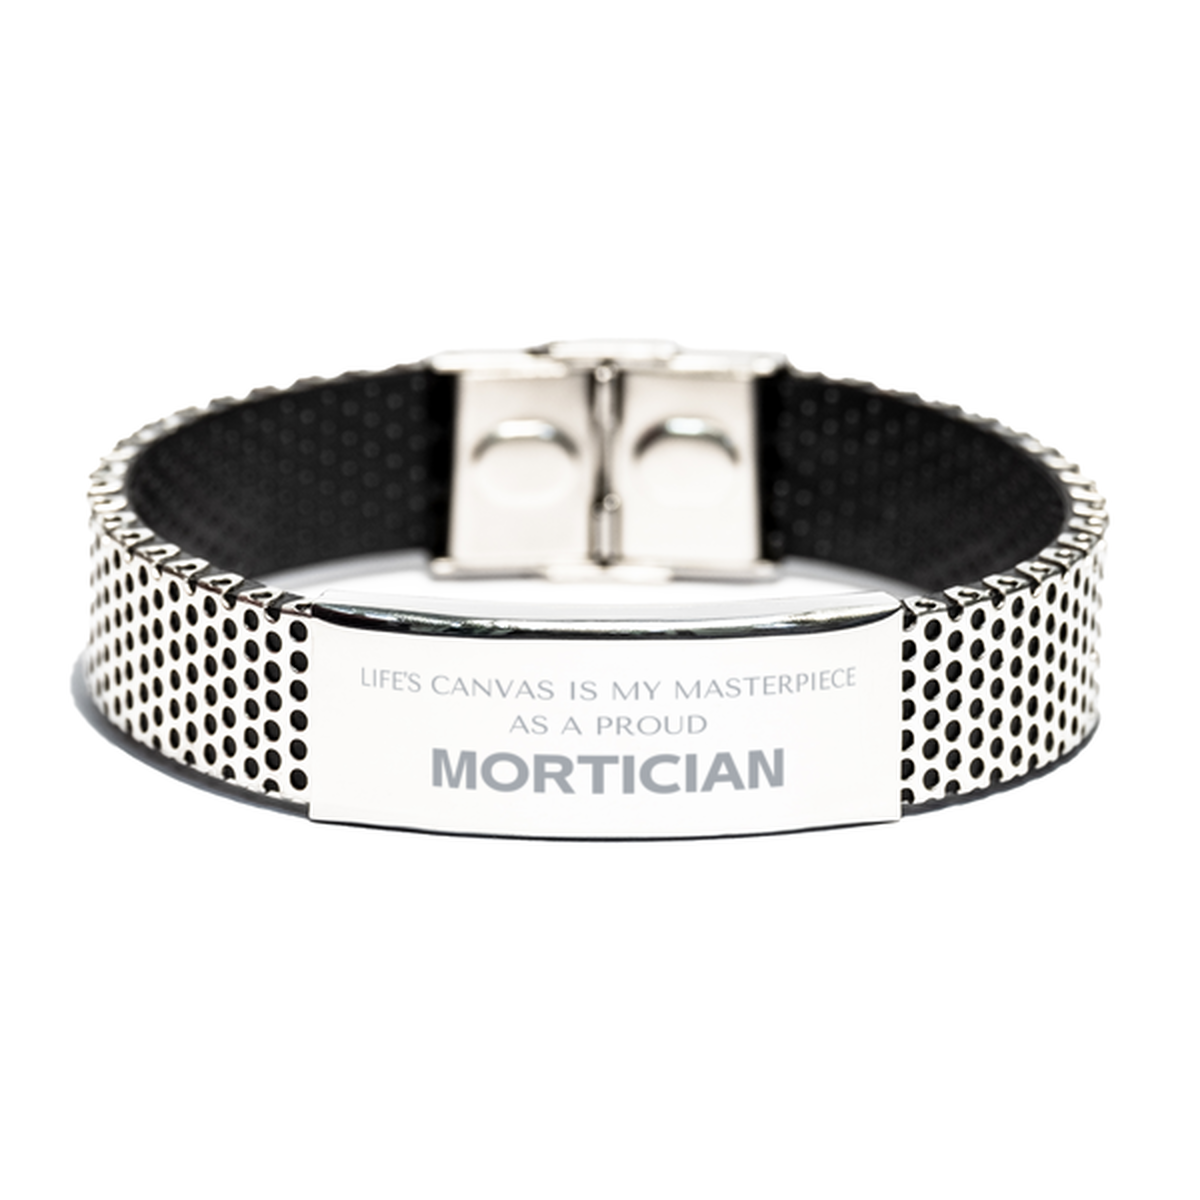 Proud Mortician Gifts, Life's canvas is my masterpiece, Epic Birthday Christmas Unique Stainless Steel Bracelet For Mortician, Coworkers, Men, Women, Friends